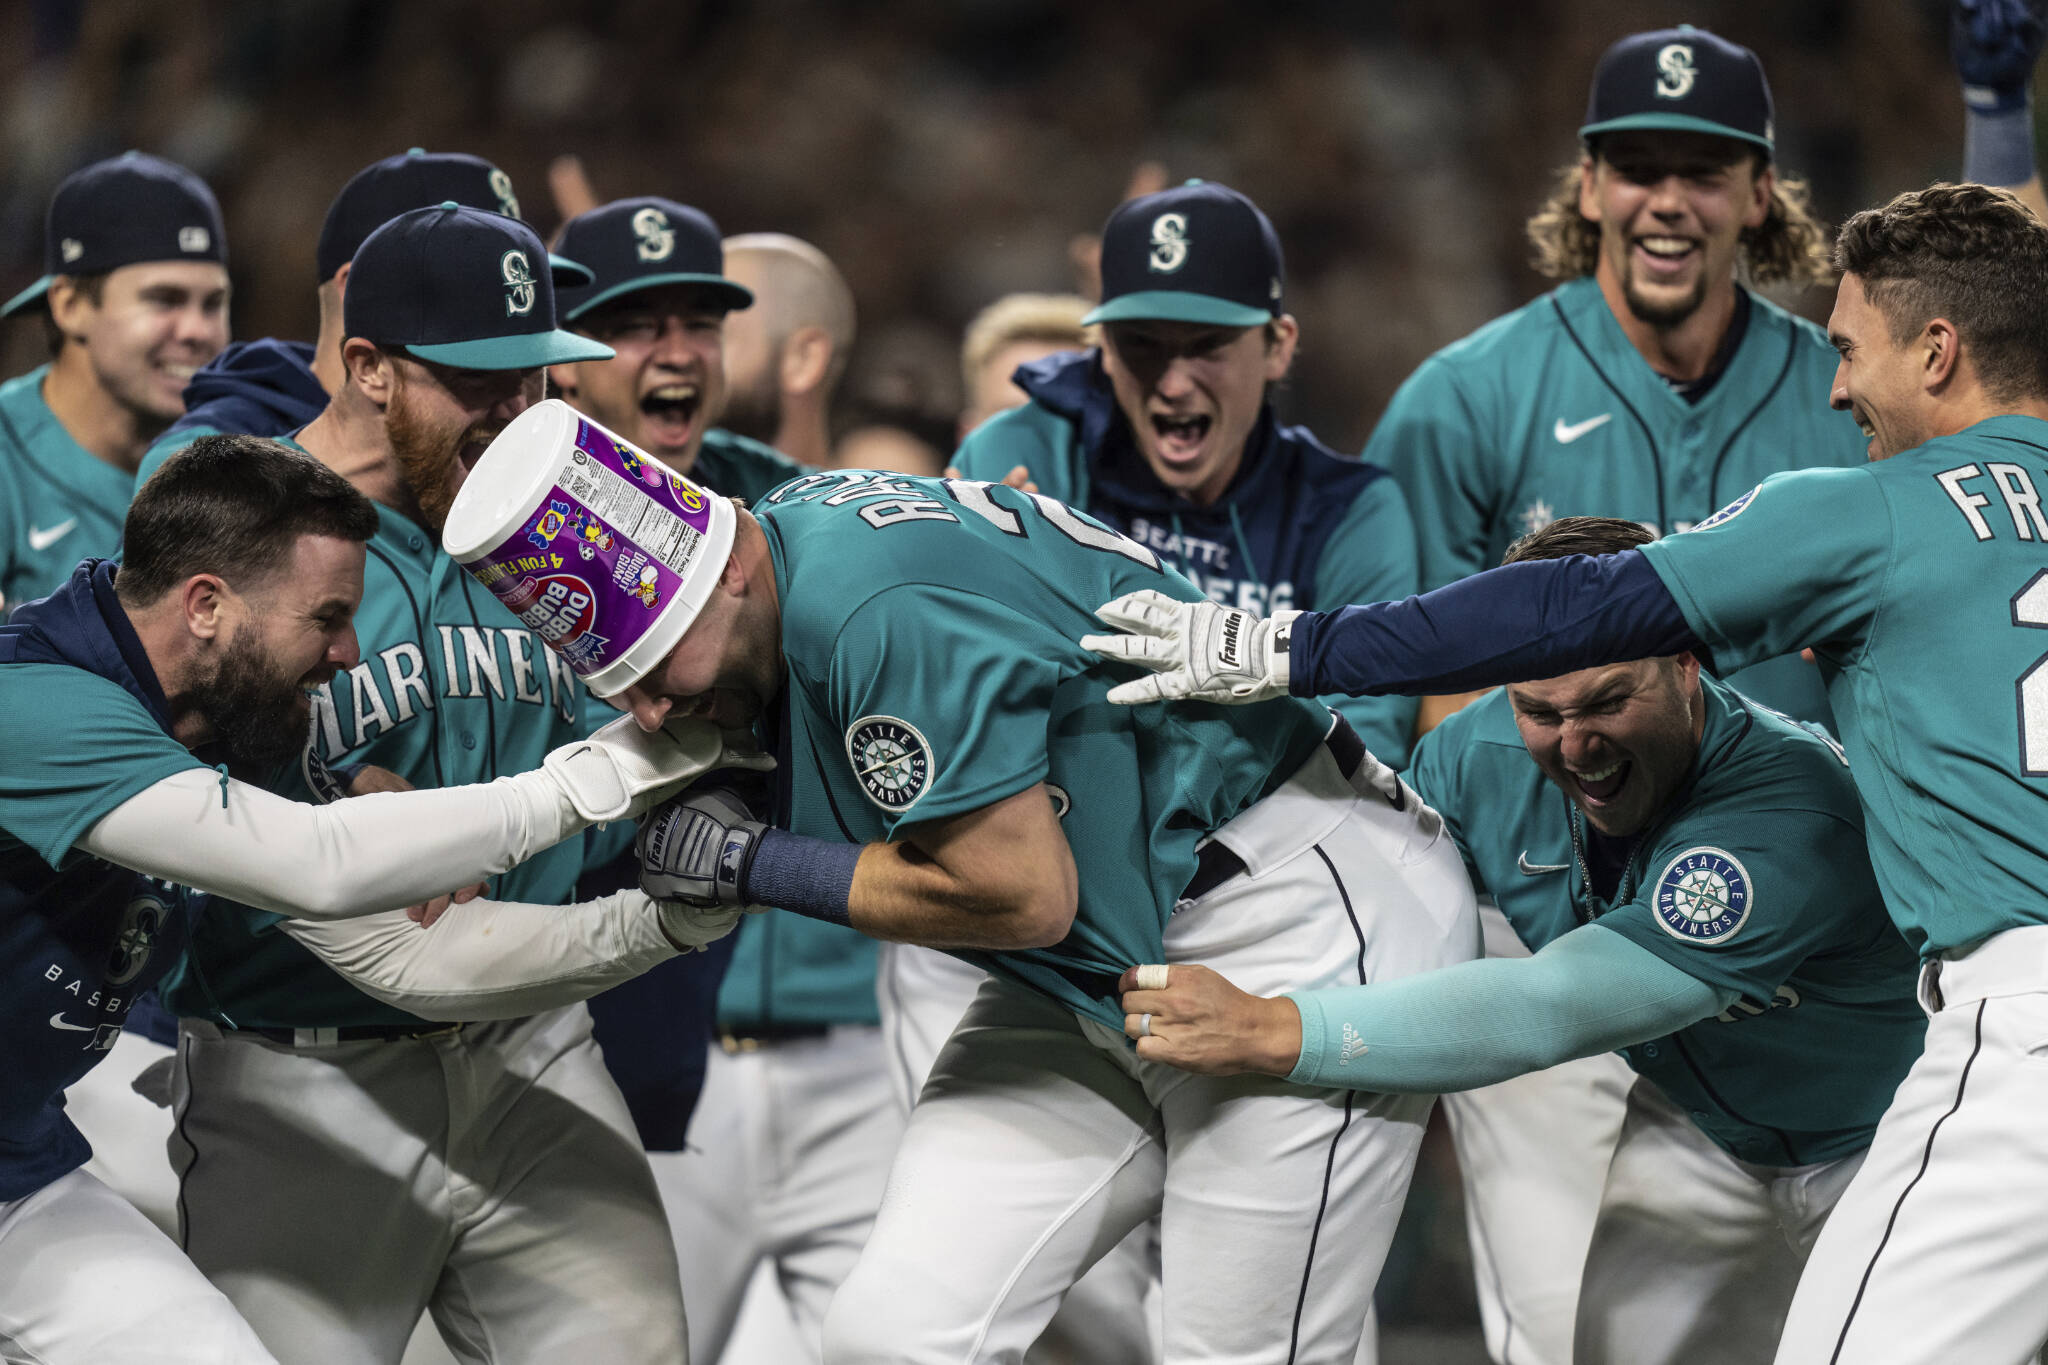 Mariners including Jesse Winker (left), Ty France (third from right), Logan Gilbert (second from right) and Adam Frazier (right) celebrate a walk-off home run by Cal Raleigh in ninth inning of a game against the Athletics on Friday in Seattle. The Mariners won 2-1 to clinch a spot in the playoffs. (AP Photo/Stephen Brashear)